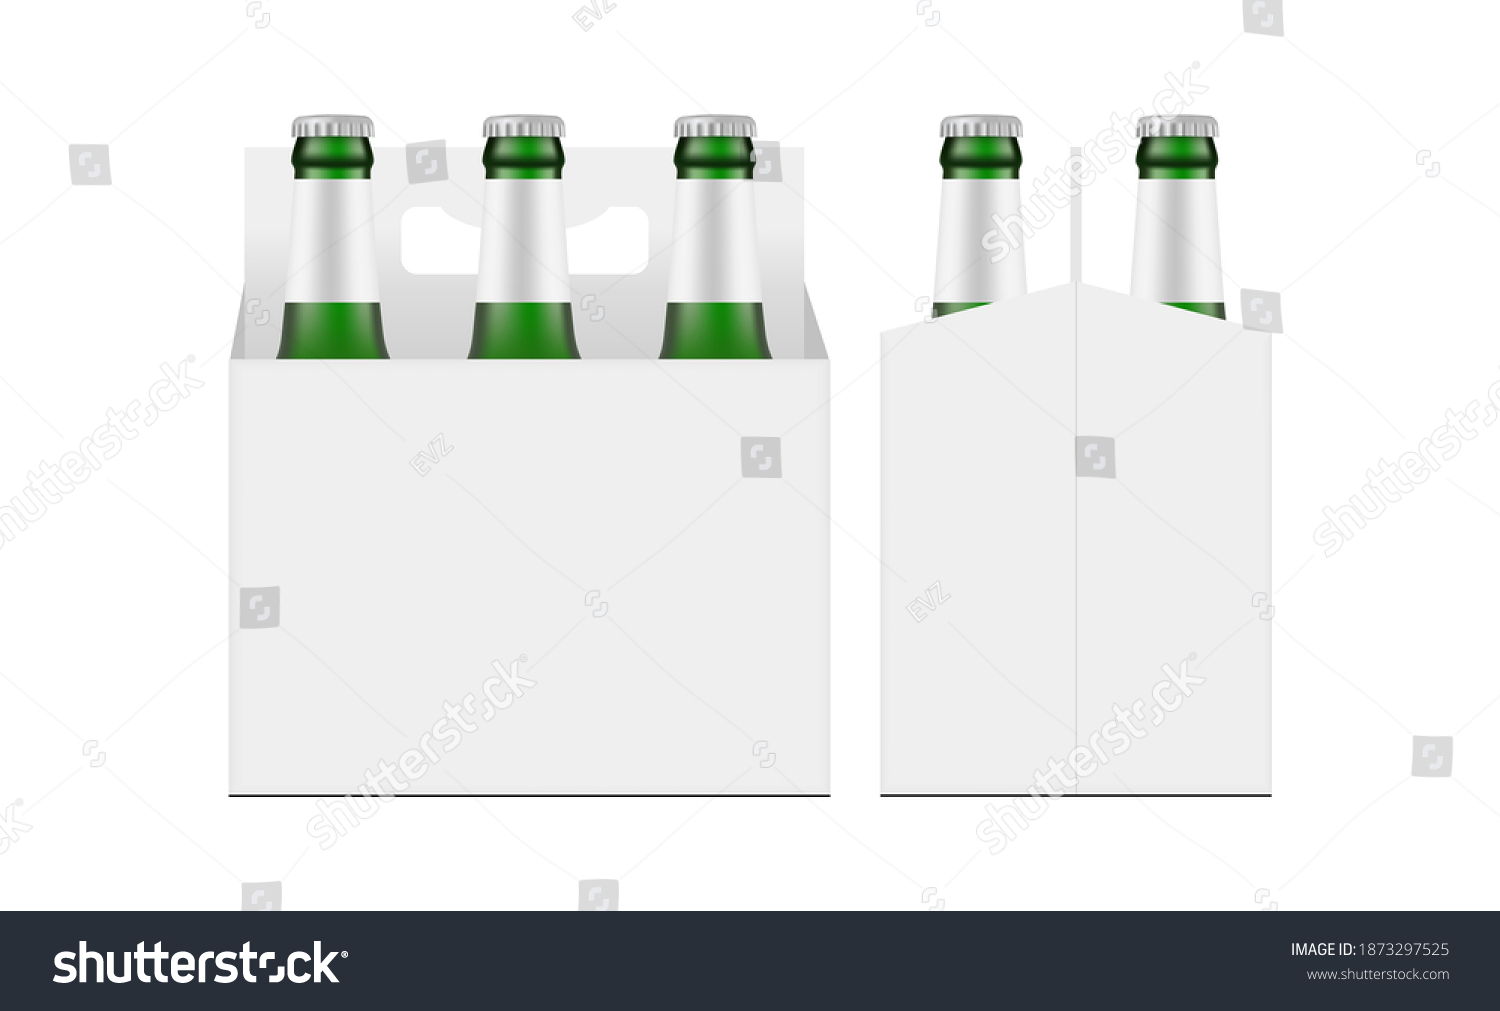 SVG of Green Beer Bottle Carrier Packaging Box Mockup, Front and Side View, Isolated on White Background. Vector Illustration svg